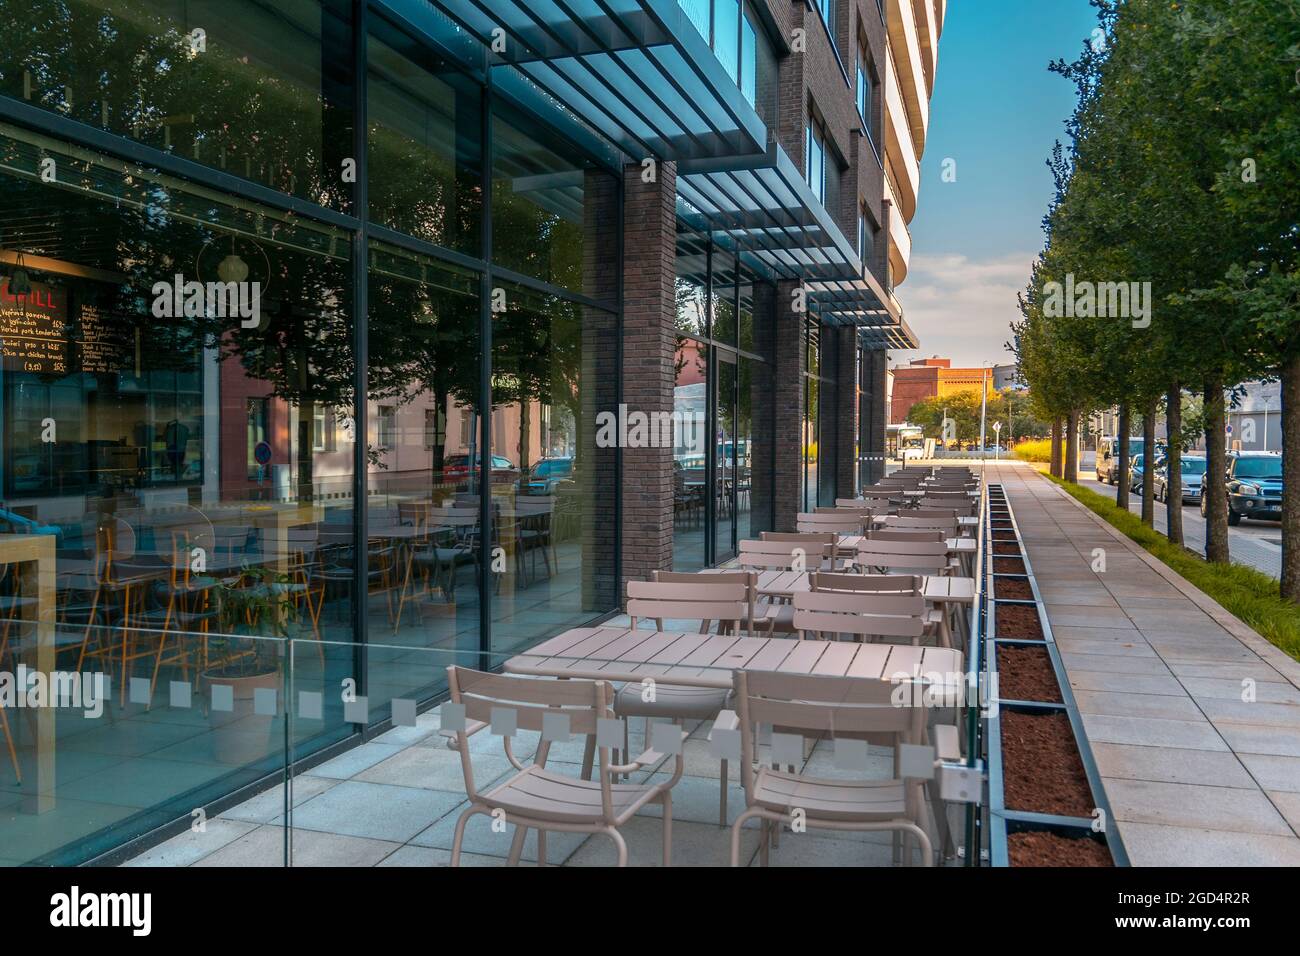 Empty street cafe. Empty tables and chairs of a street cafe. No visitors. Stock Photo